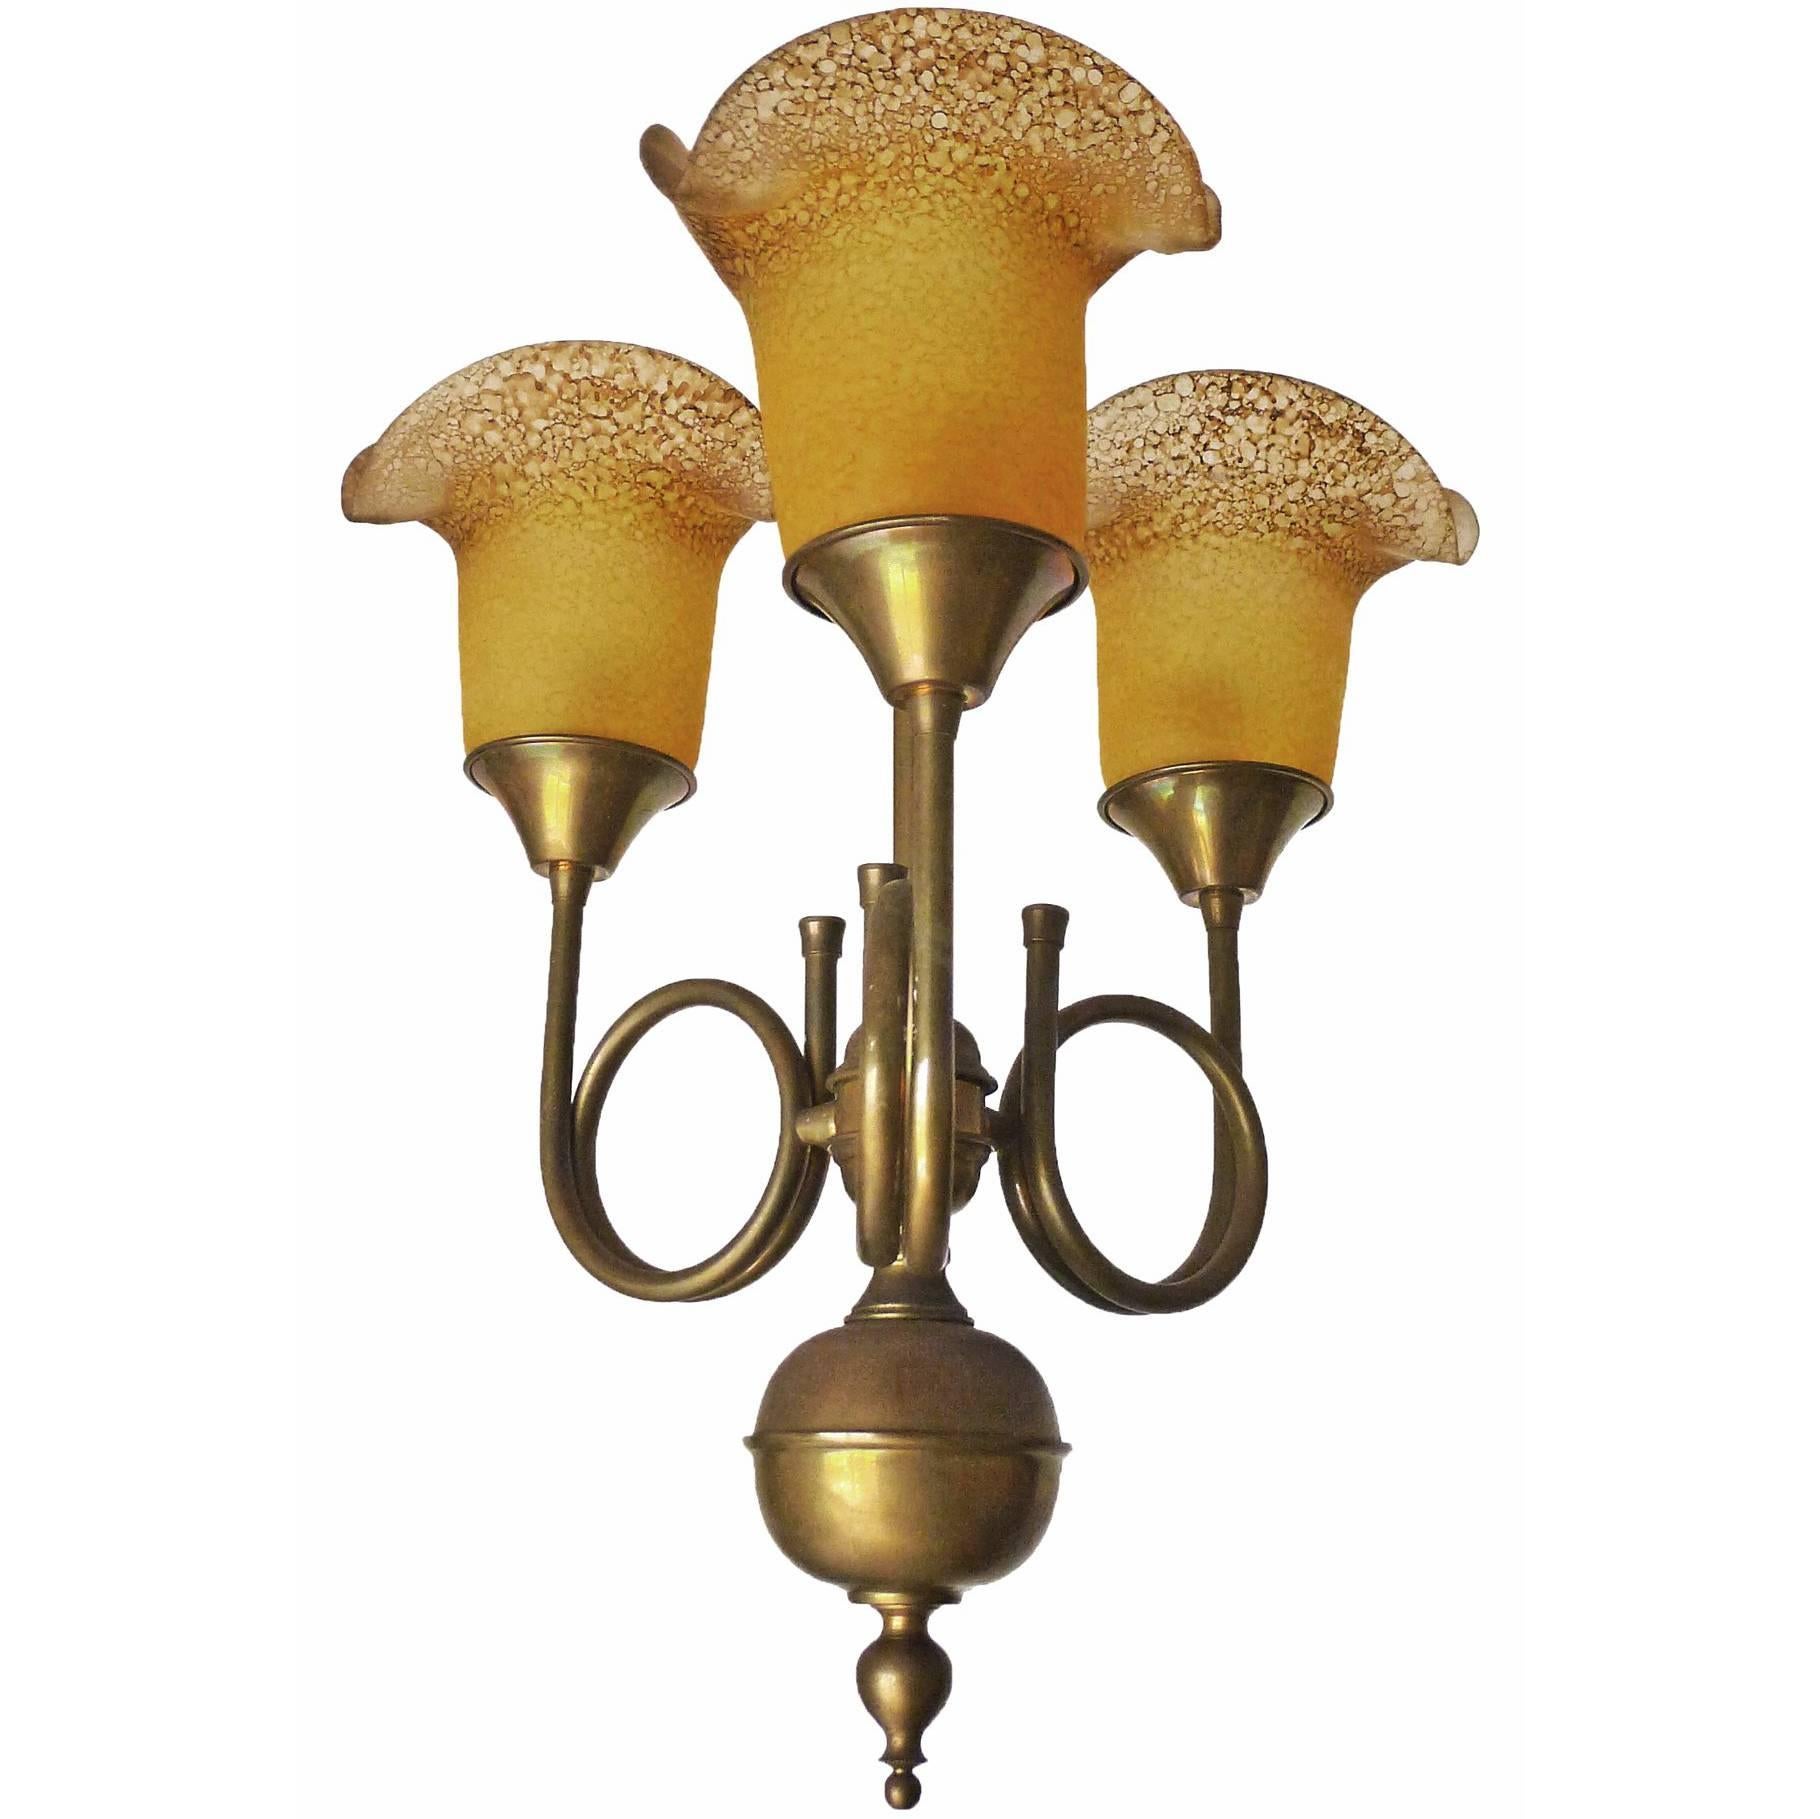 Vintage Art Deco or Art Nouveau colorful hand blown Amber art glass shades 'Hunting Horn' pâte de verre chandelier
Measures:
Diameter 16 in / 40 cm
Height 28 in/ 70 cm
Weight 6 lb. (3 kg)
Three-light bulbs E14 /60 with good working condition